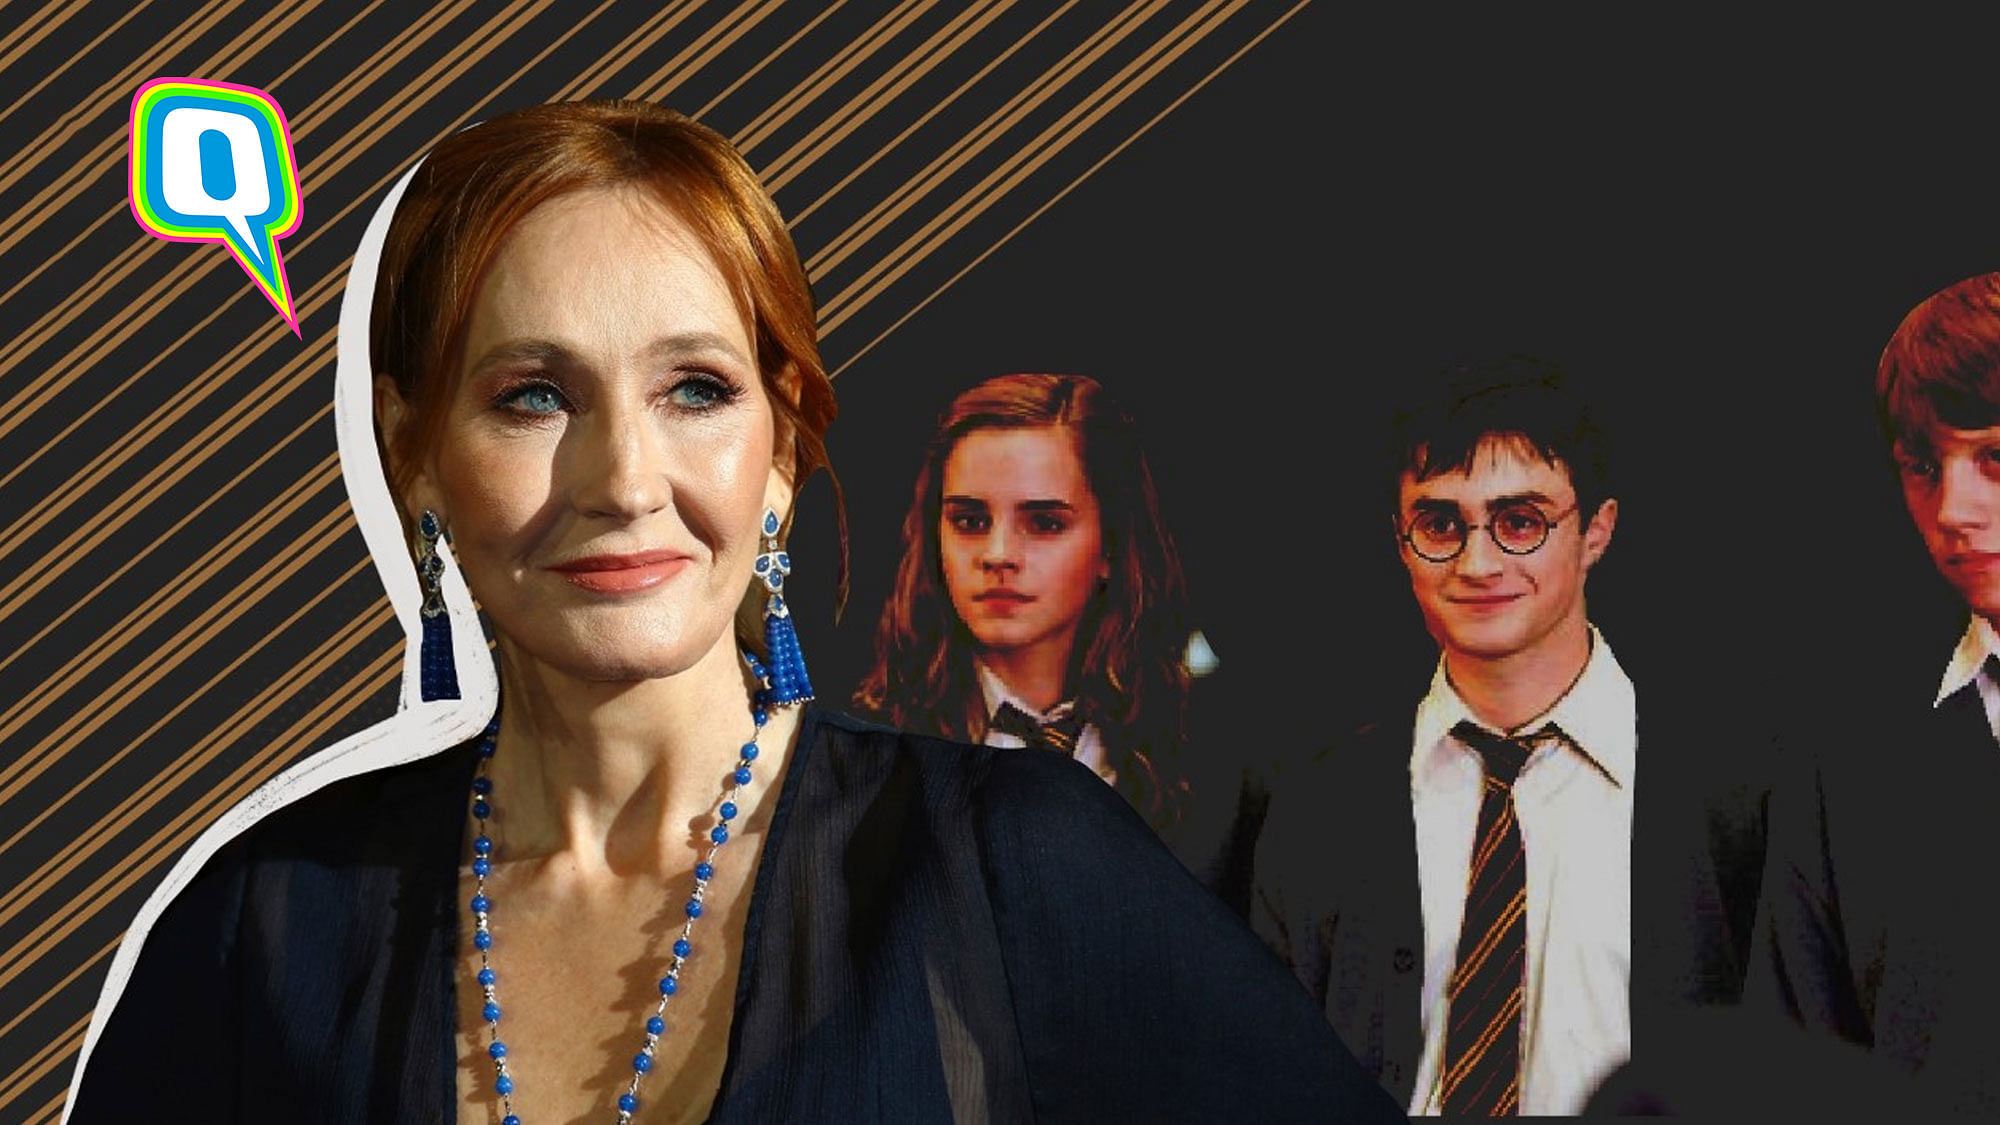 JK Rowling needs to stop.